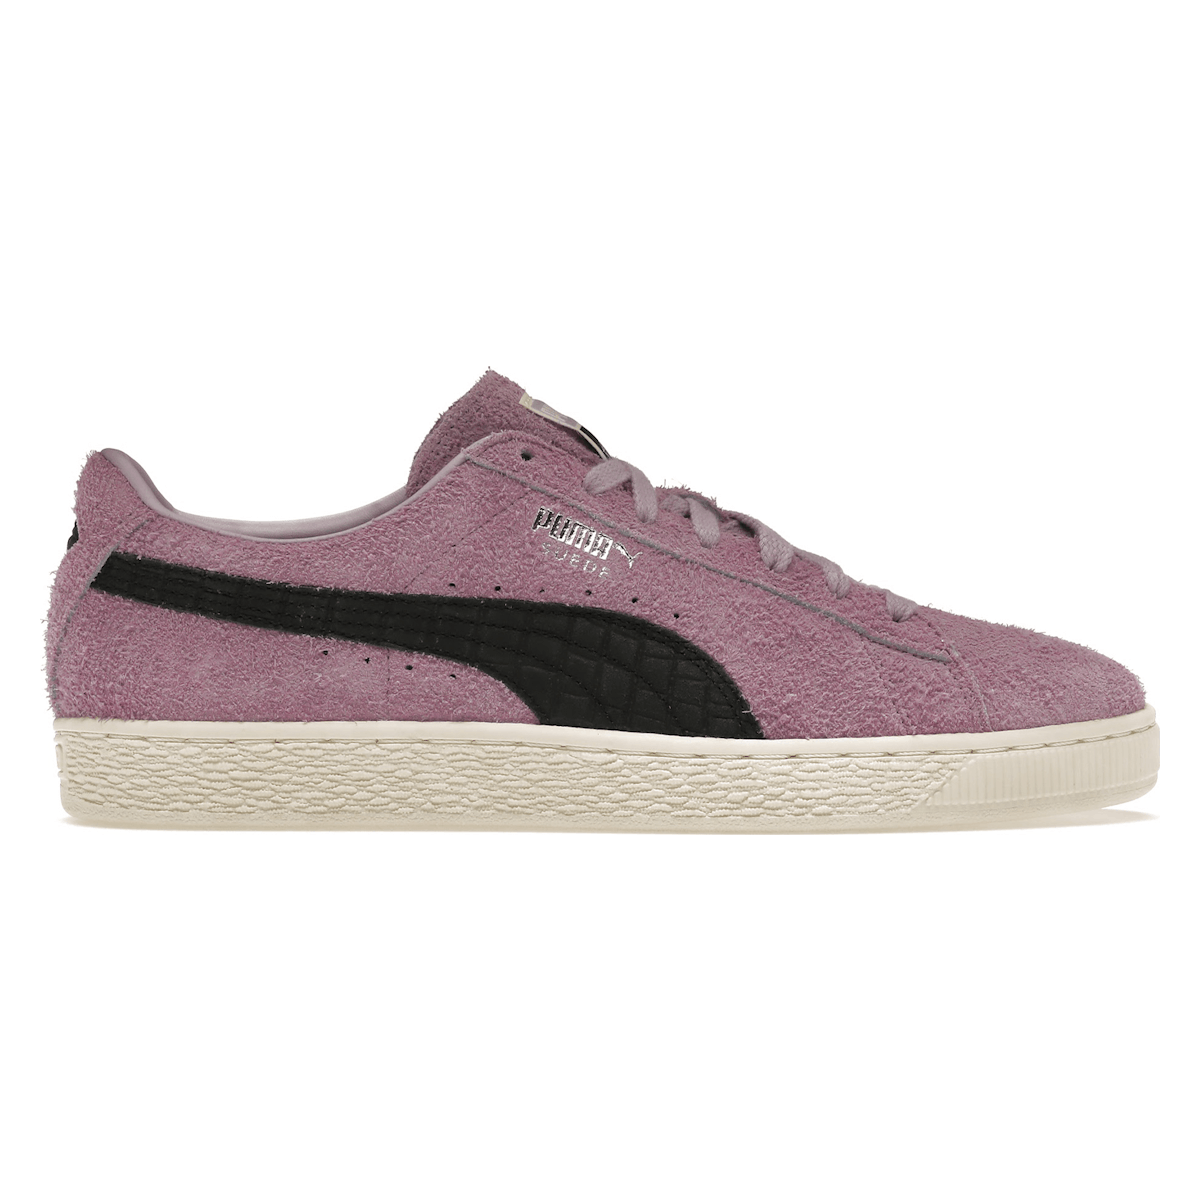 Puma Suede Diamond Supply Co. Orchid Bloom